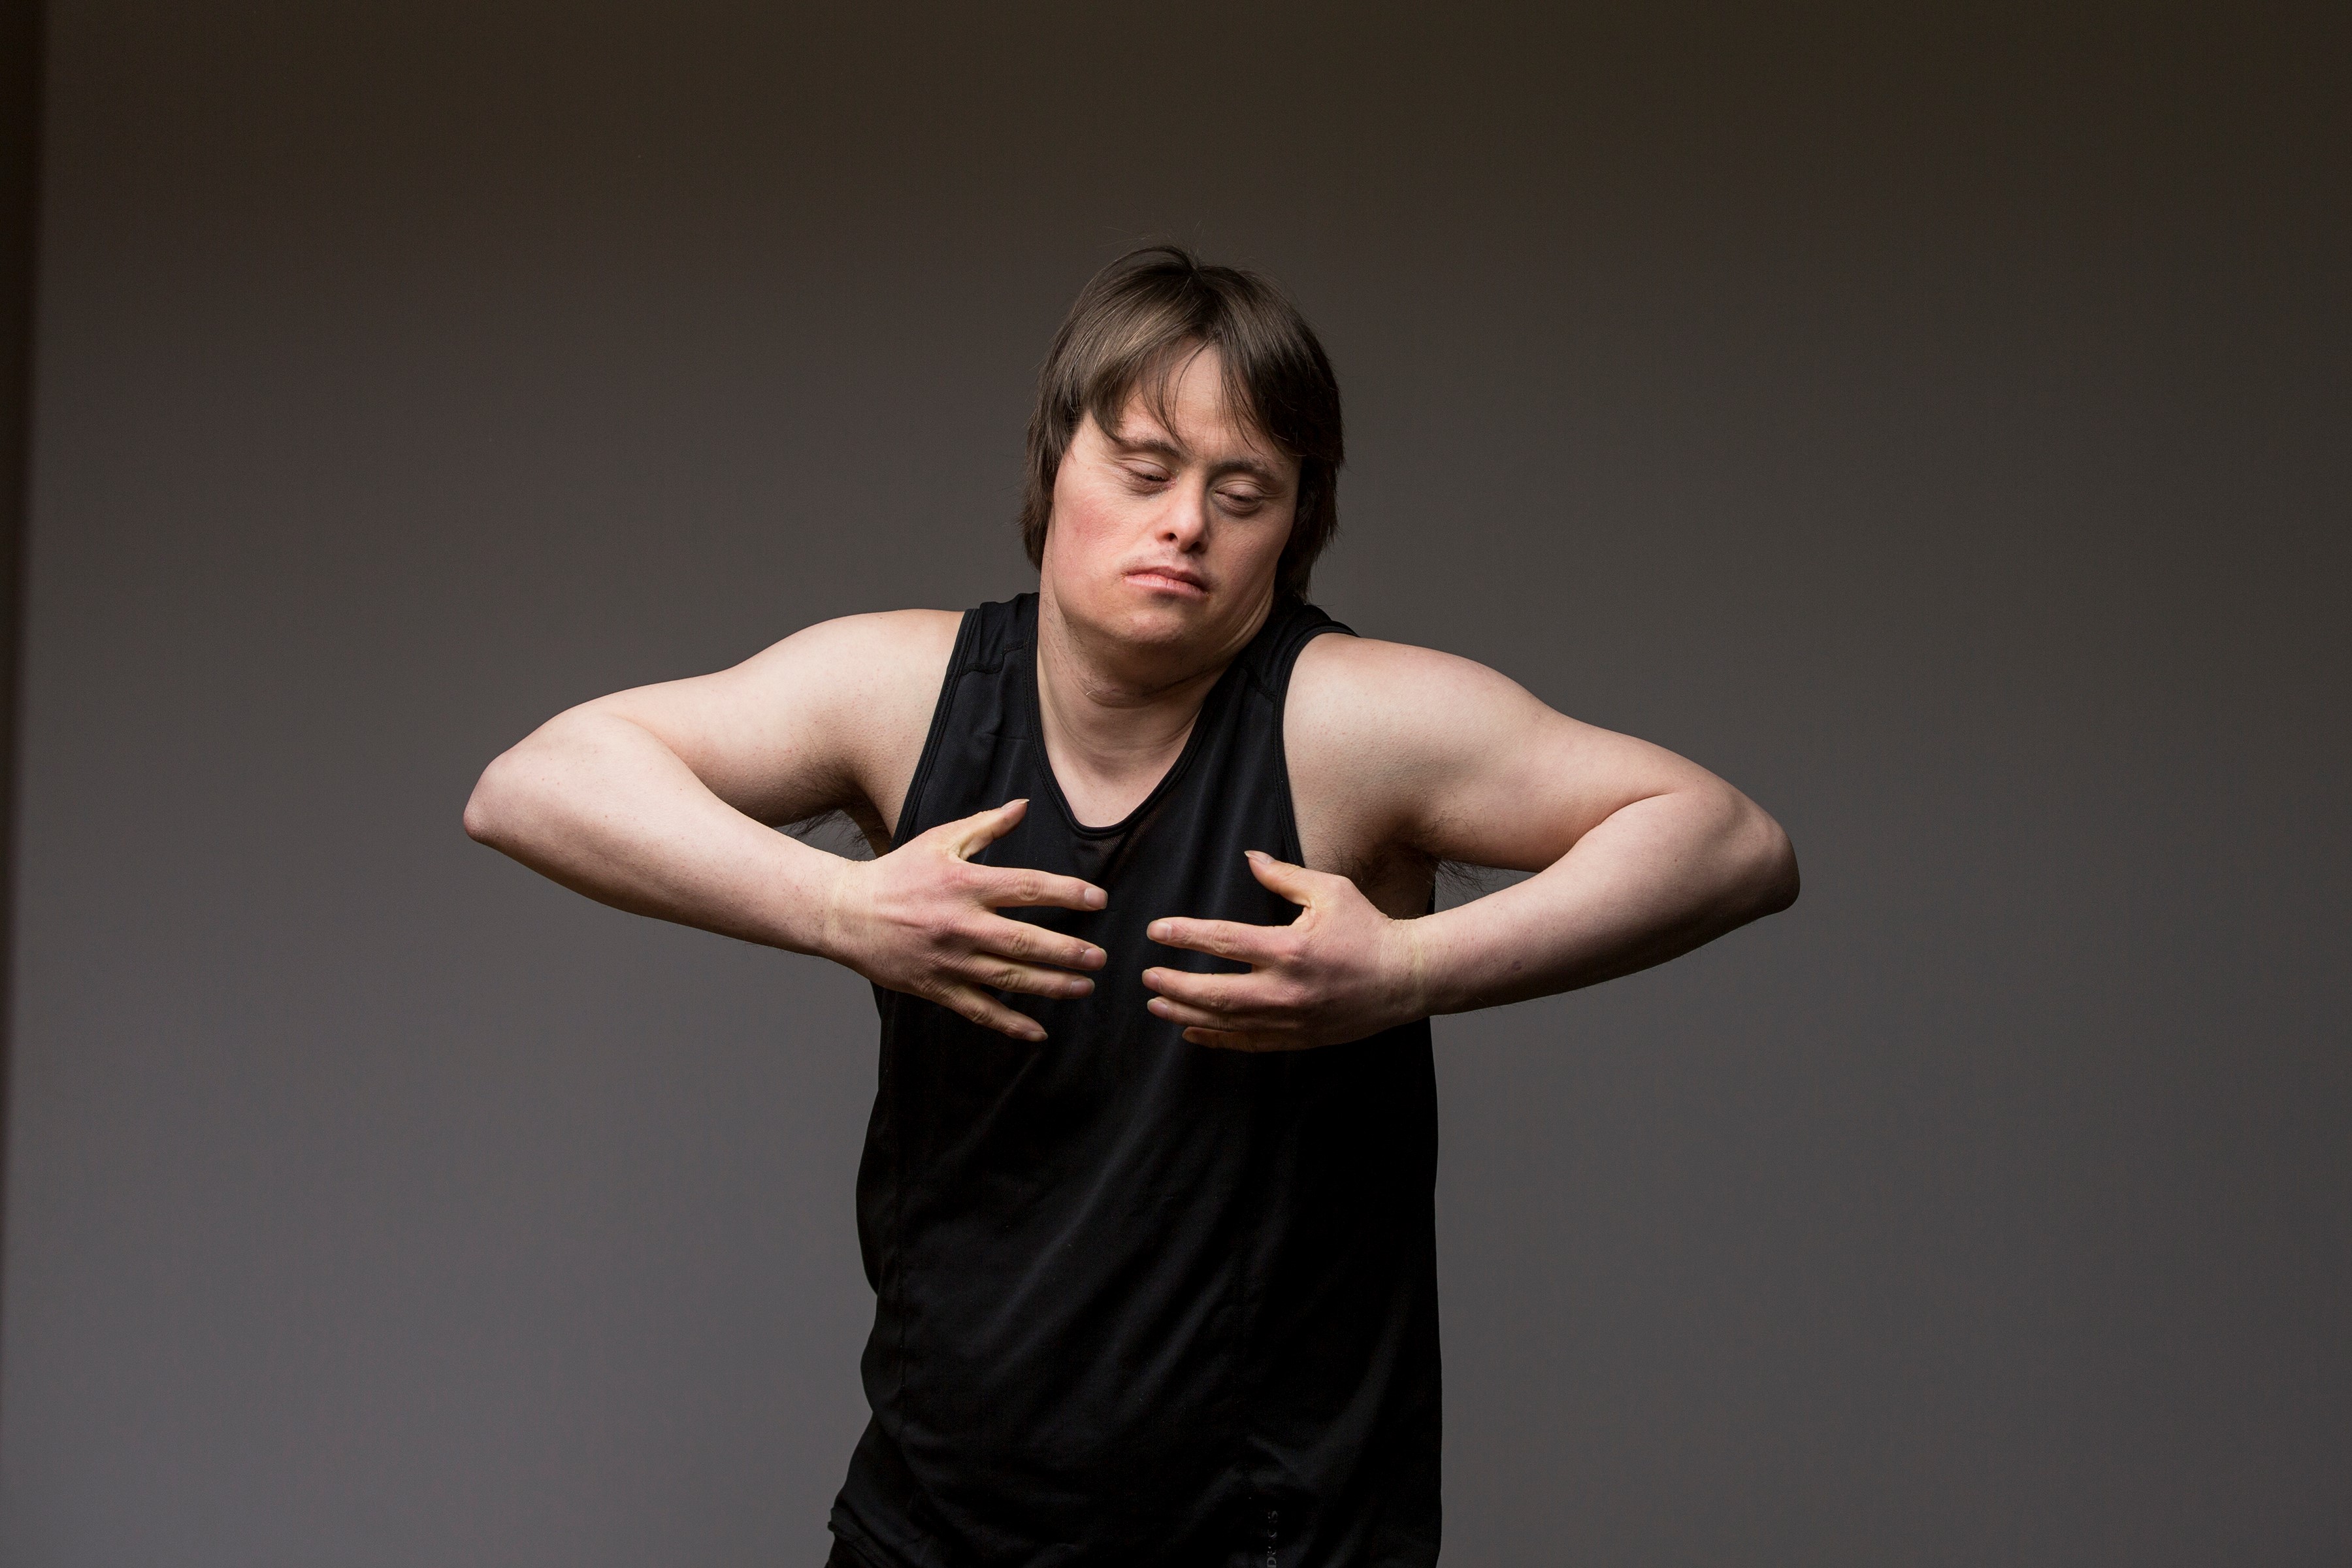 Image description: Luke stands against a grey backdrop. He wears a black singlet, his arms are bent and hands are drawn into his chest. The photo has an emotive physicality to it, like a moment from a dance.